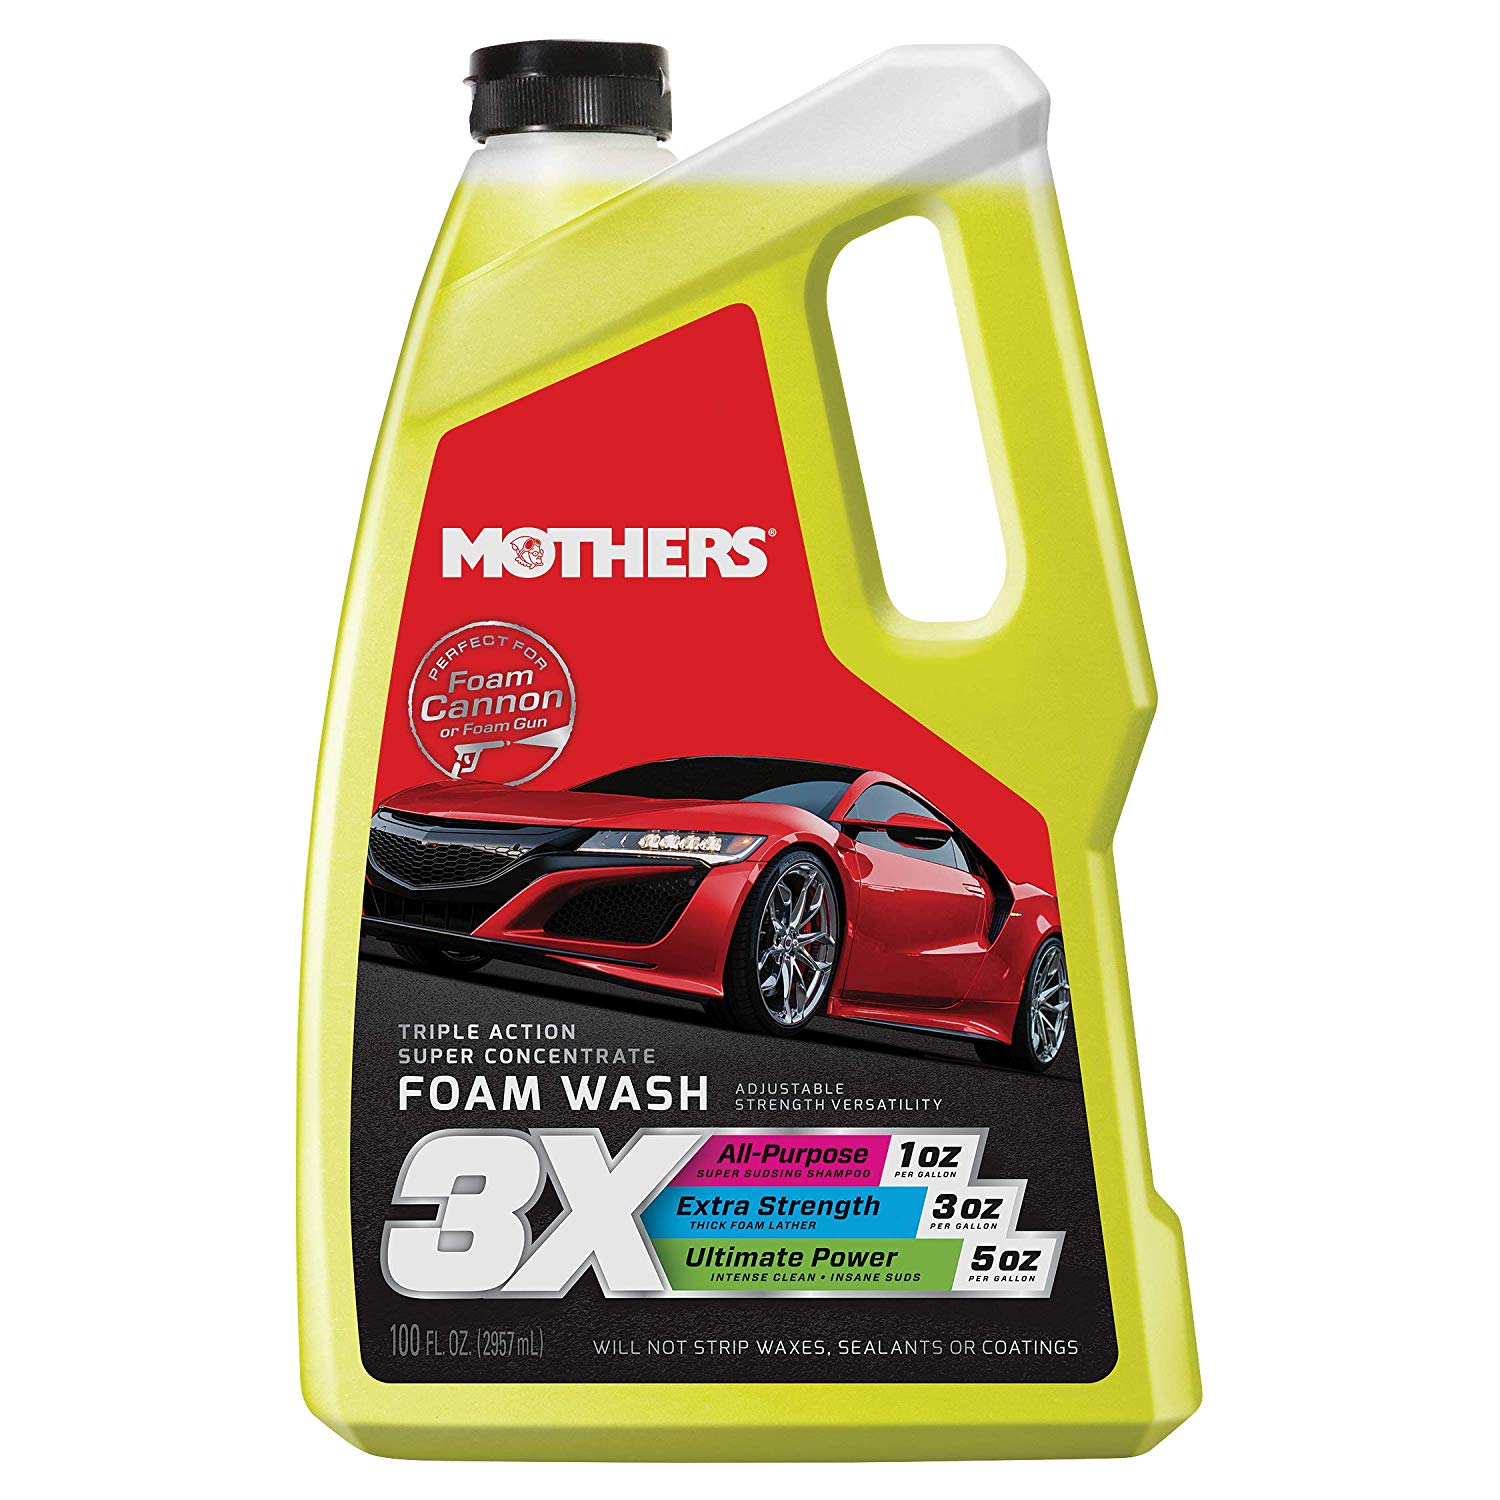 Mothers Triple Action Foaming Wash 3 Liter